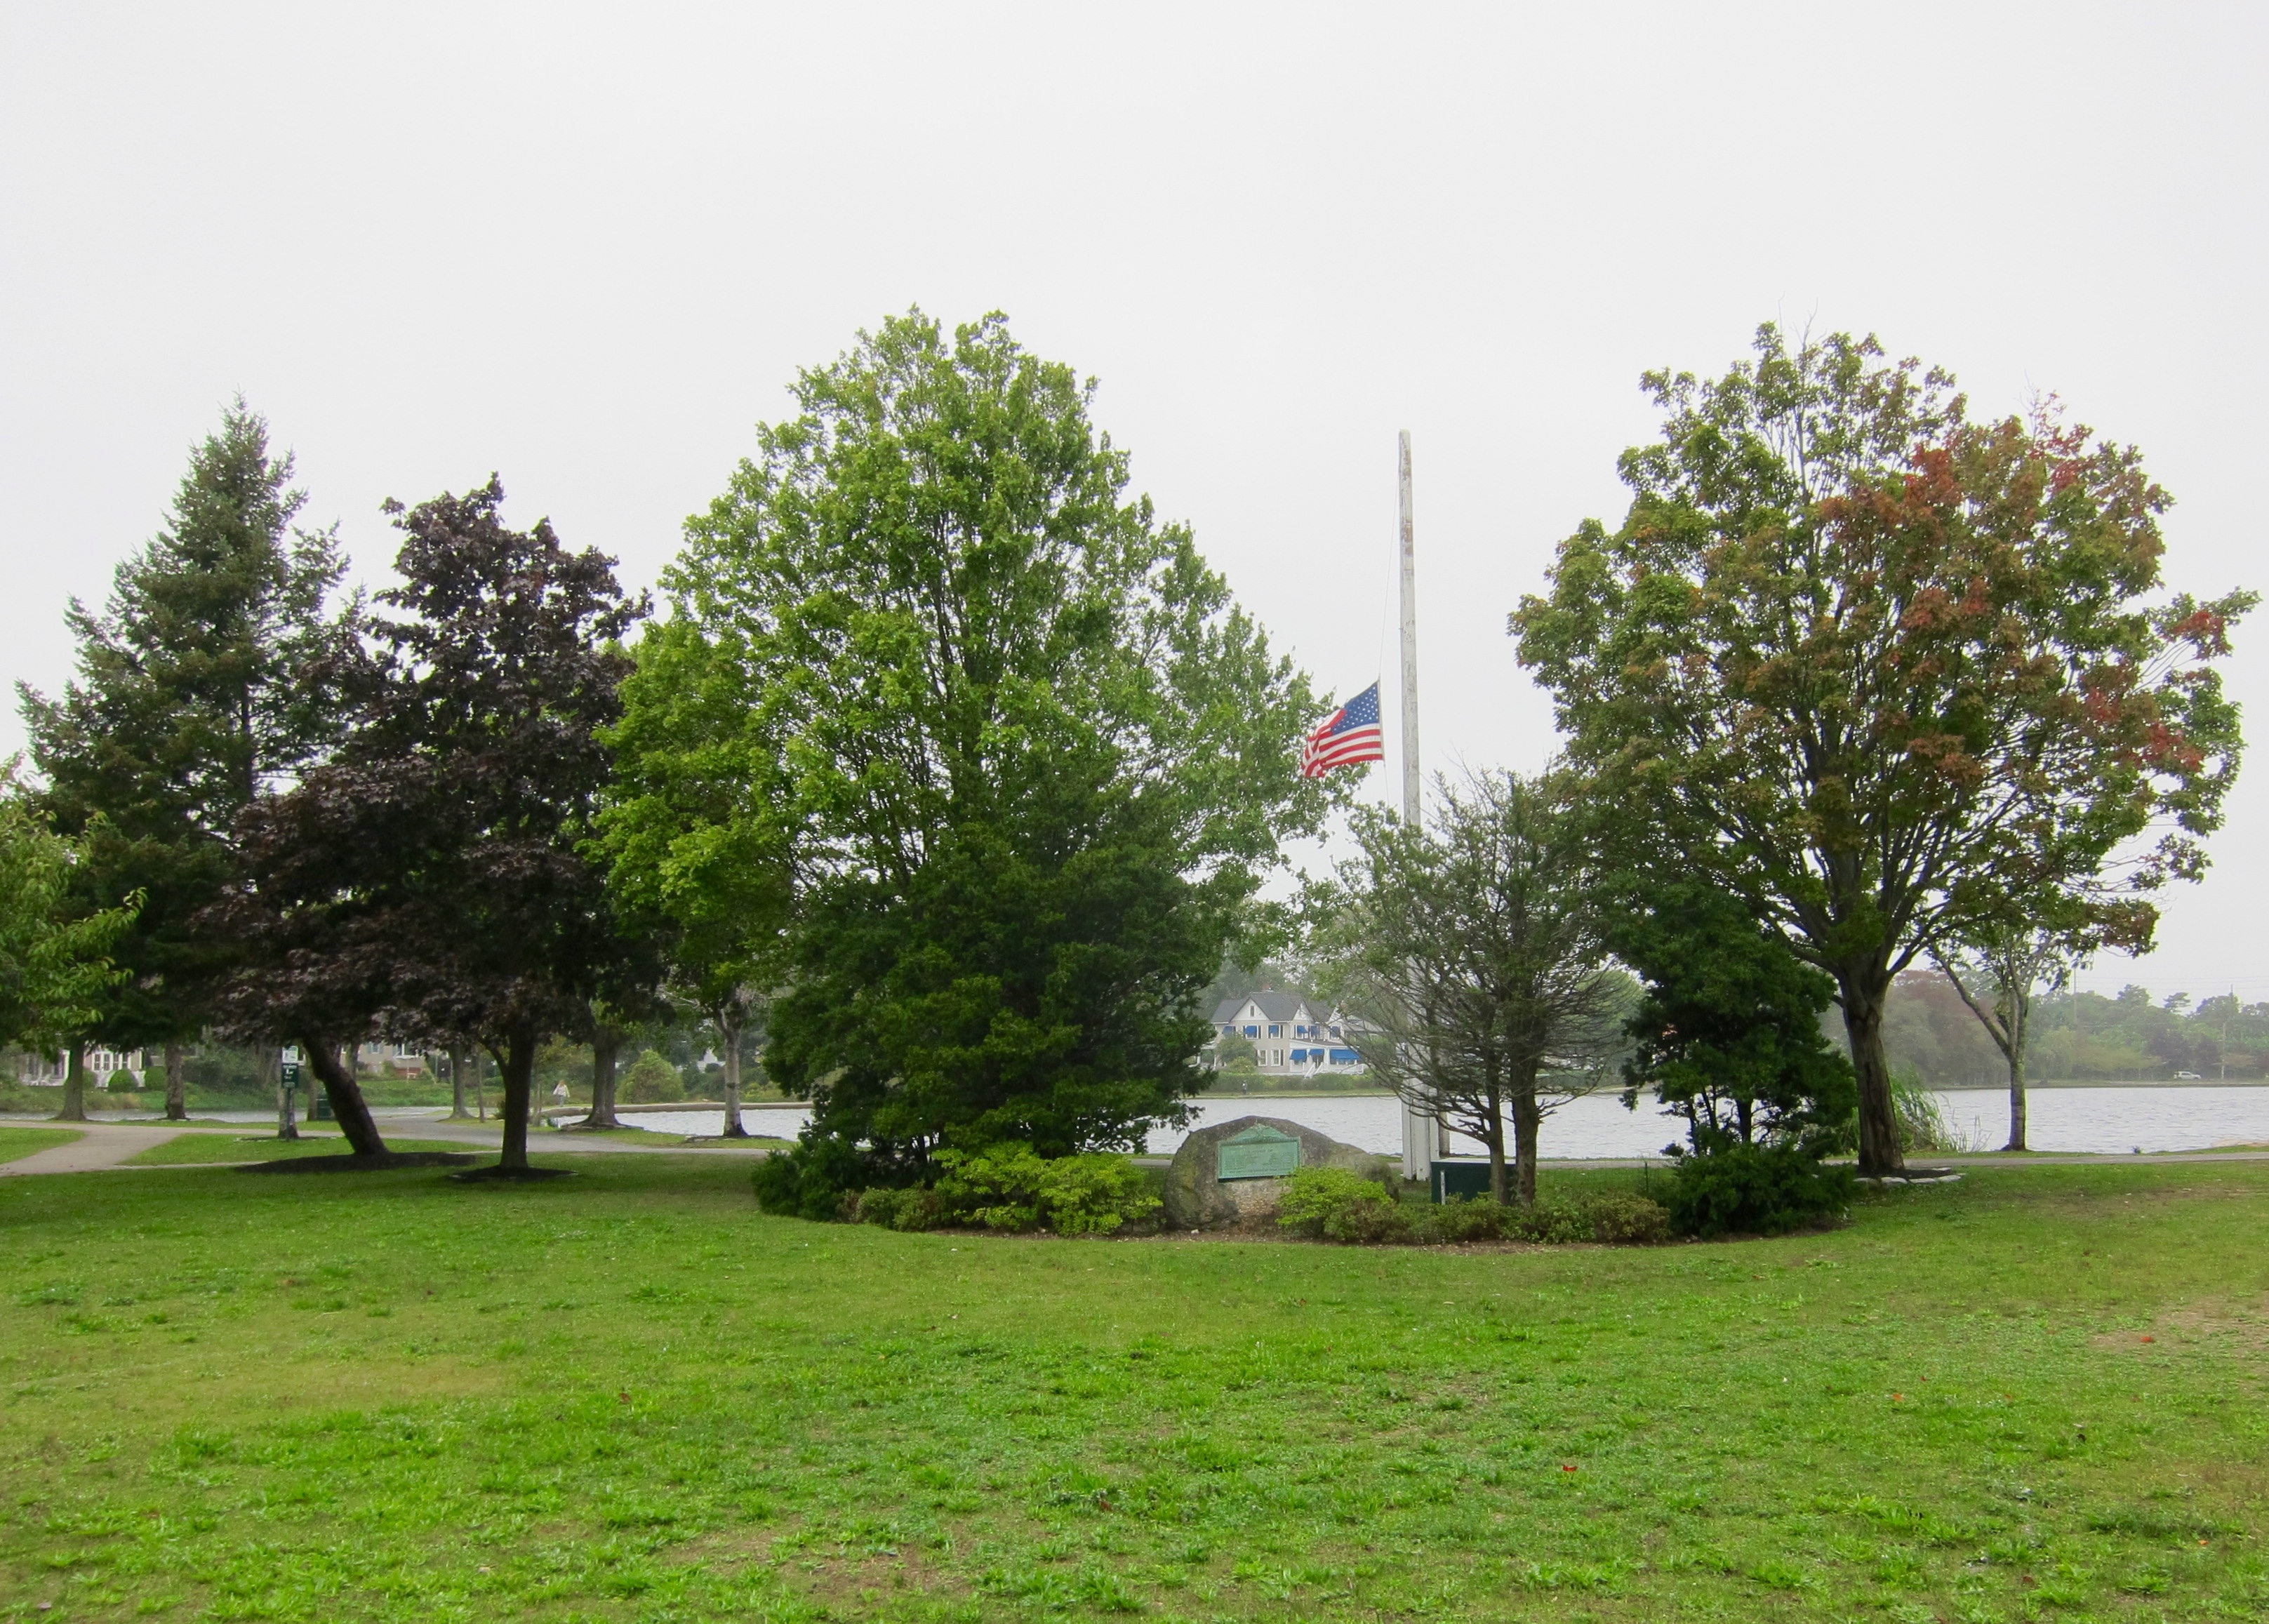 Babylon World War I Memorial Marker - Wide View, with Argyle Lake in the Background